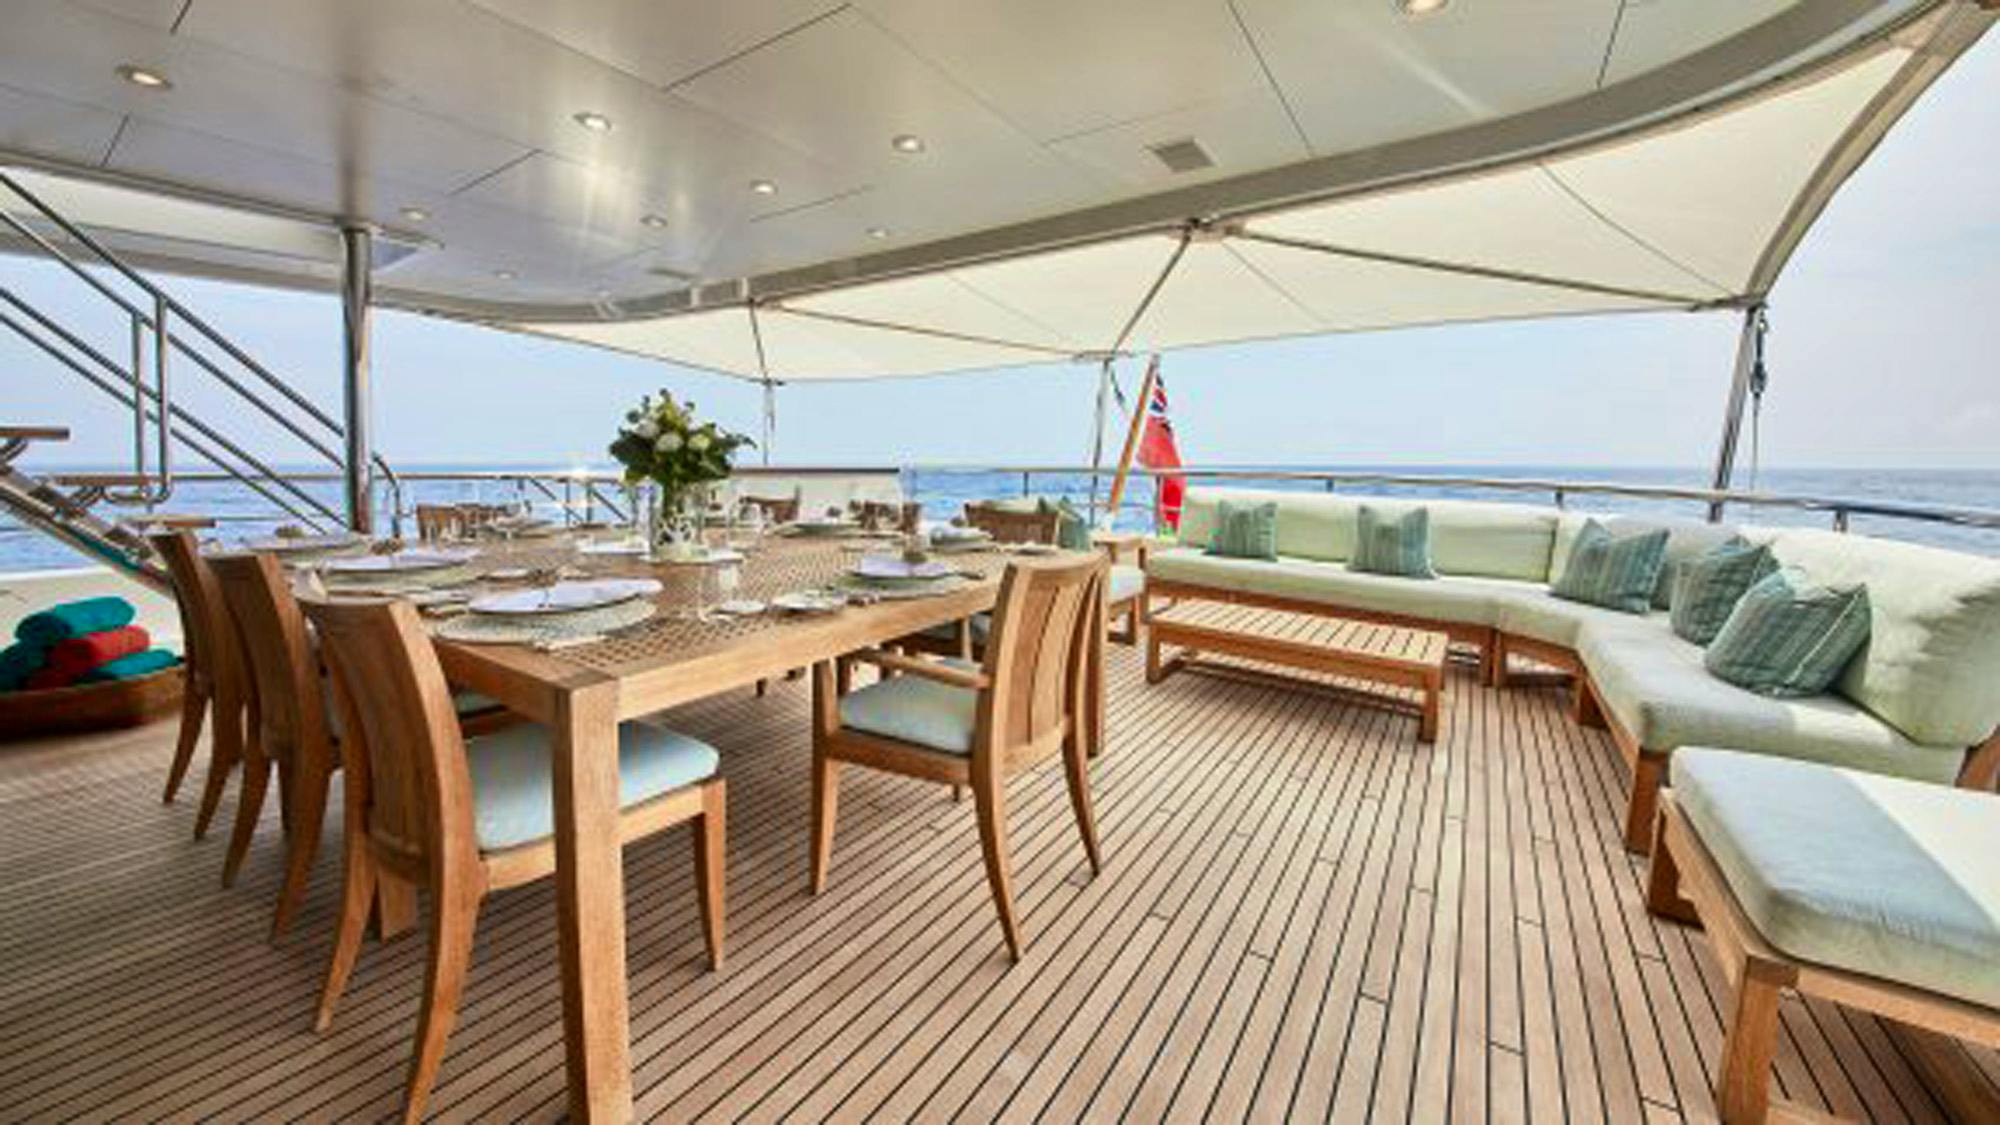 Seasonal Rates for GLADIATOR Private Luxury Yacht For Charter